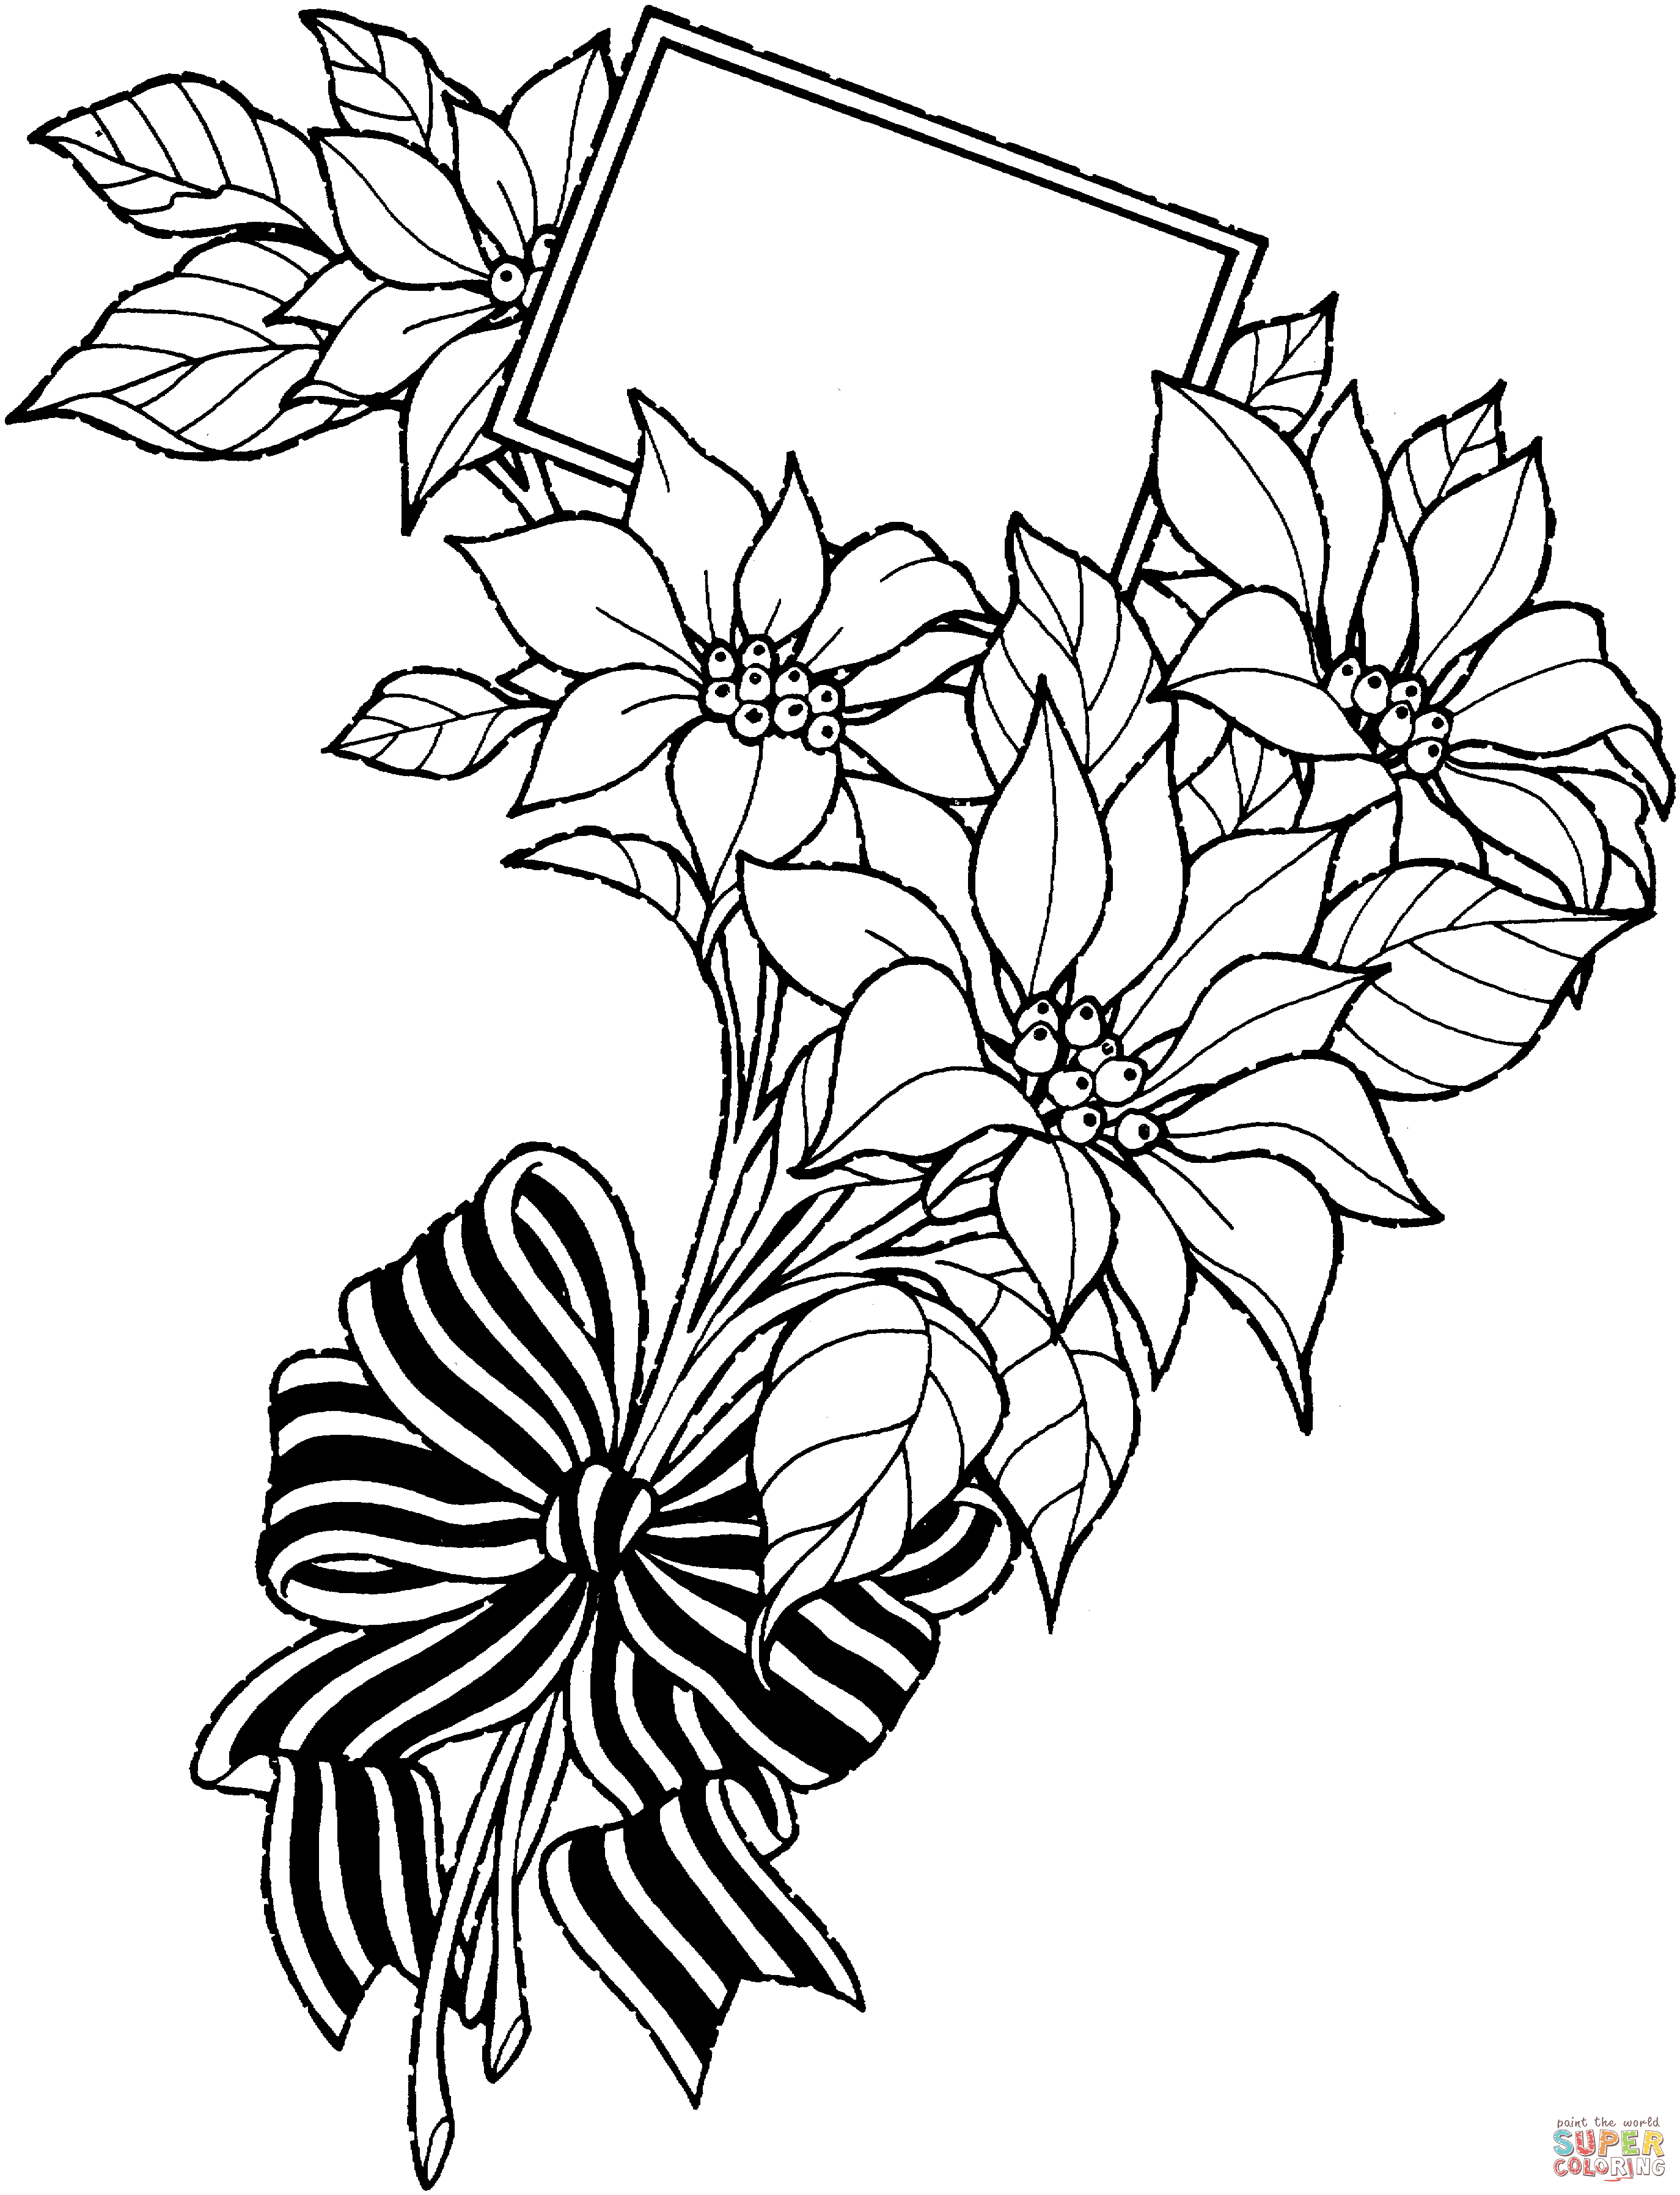 Bouquet Of Flowers Coloring Page Christmas Flower Bouquet With Greeting Card Coloring Page Free